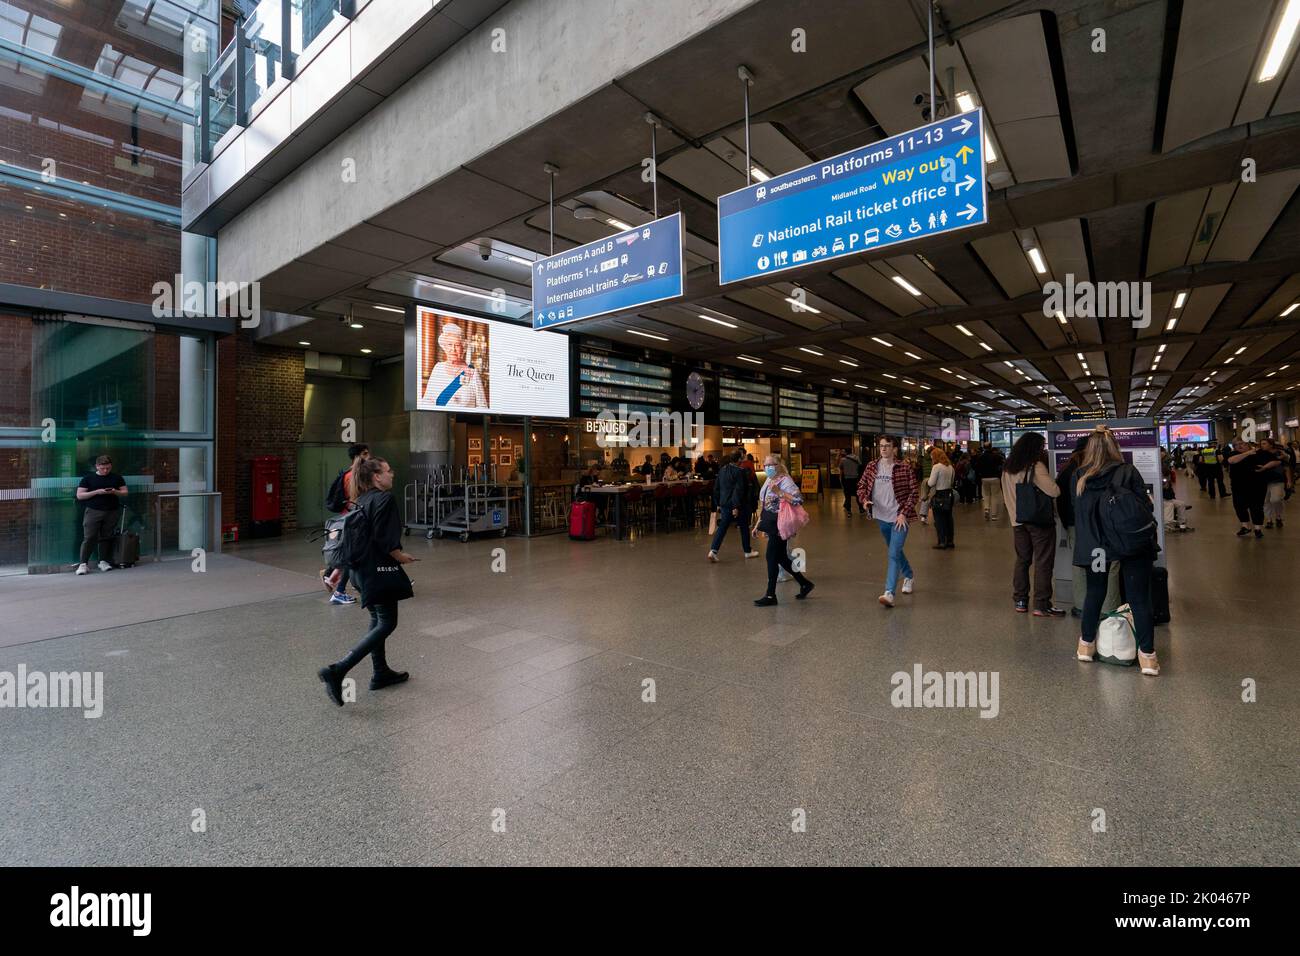 St Pancras Station has a billboard of the Queen Elizabeth 11 after the passing of Her Majesty The Queen, London, United Kingdom, 9th September 2022  (Photo by Richard Washbrooke/News Images) Stock Photo